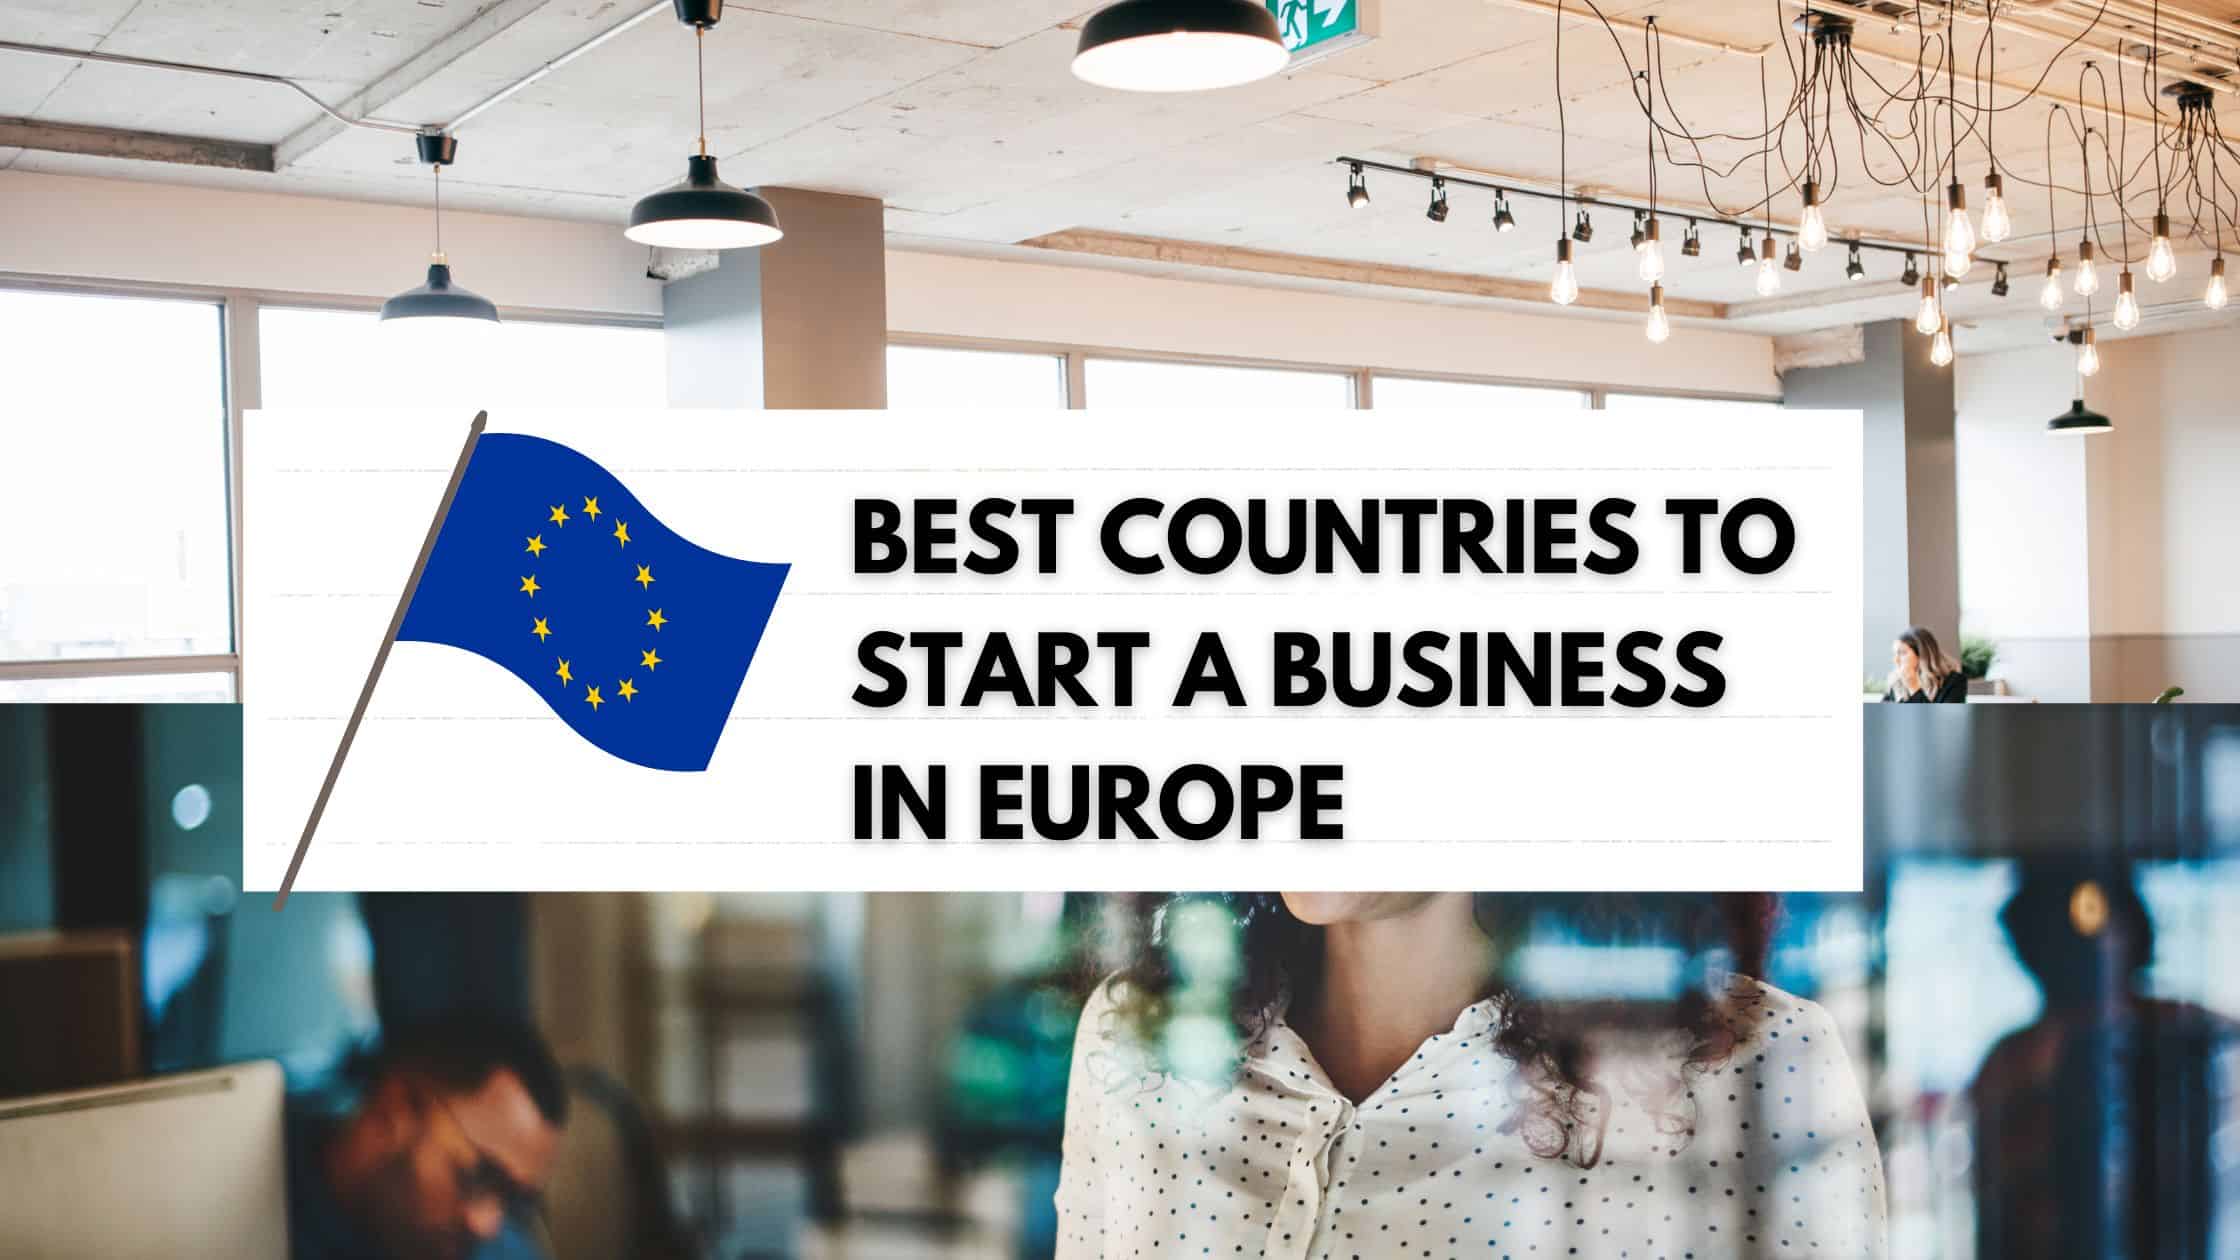 Best countries to start a business in Europe